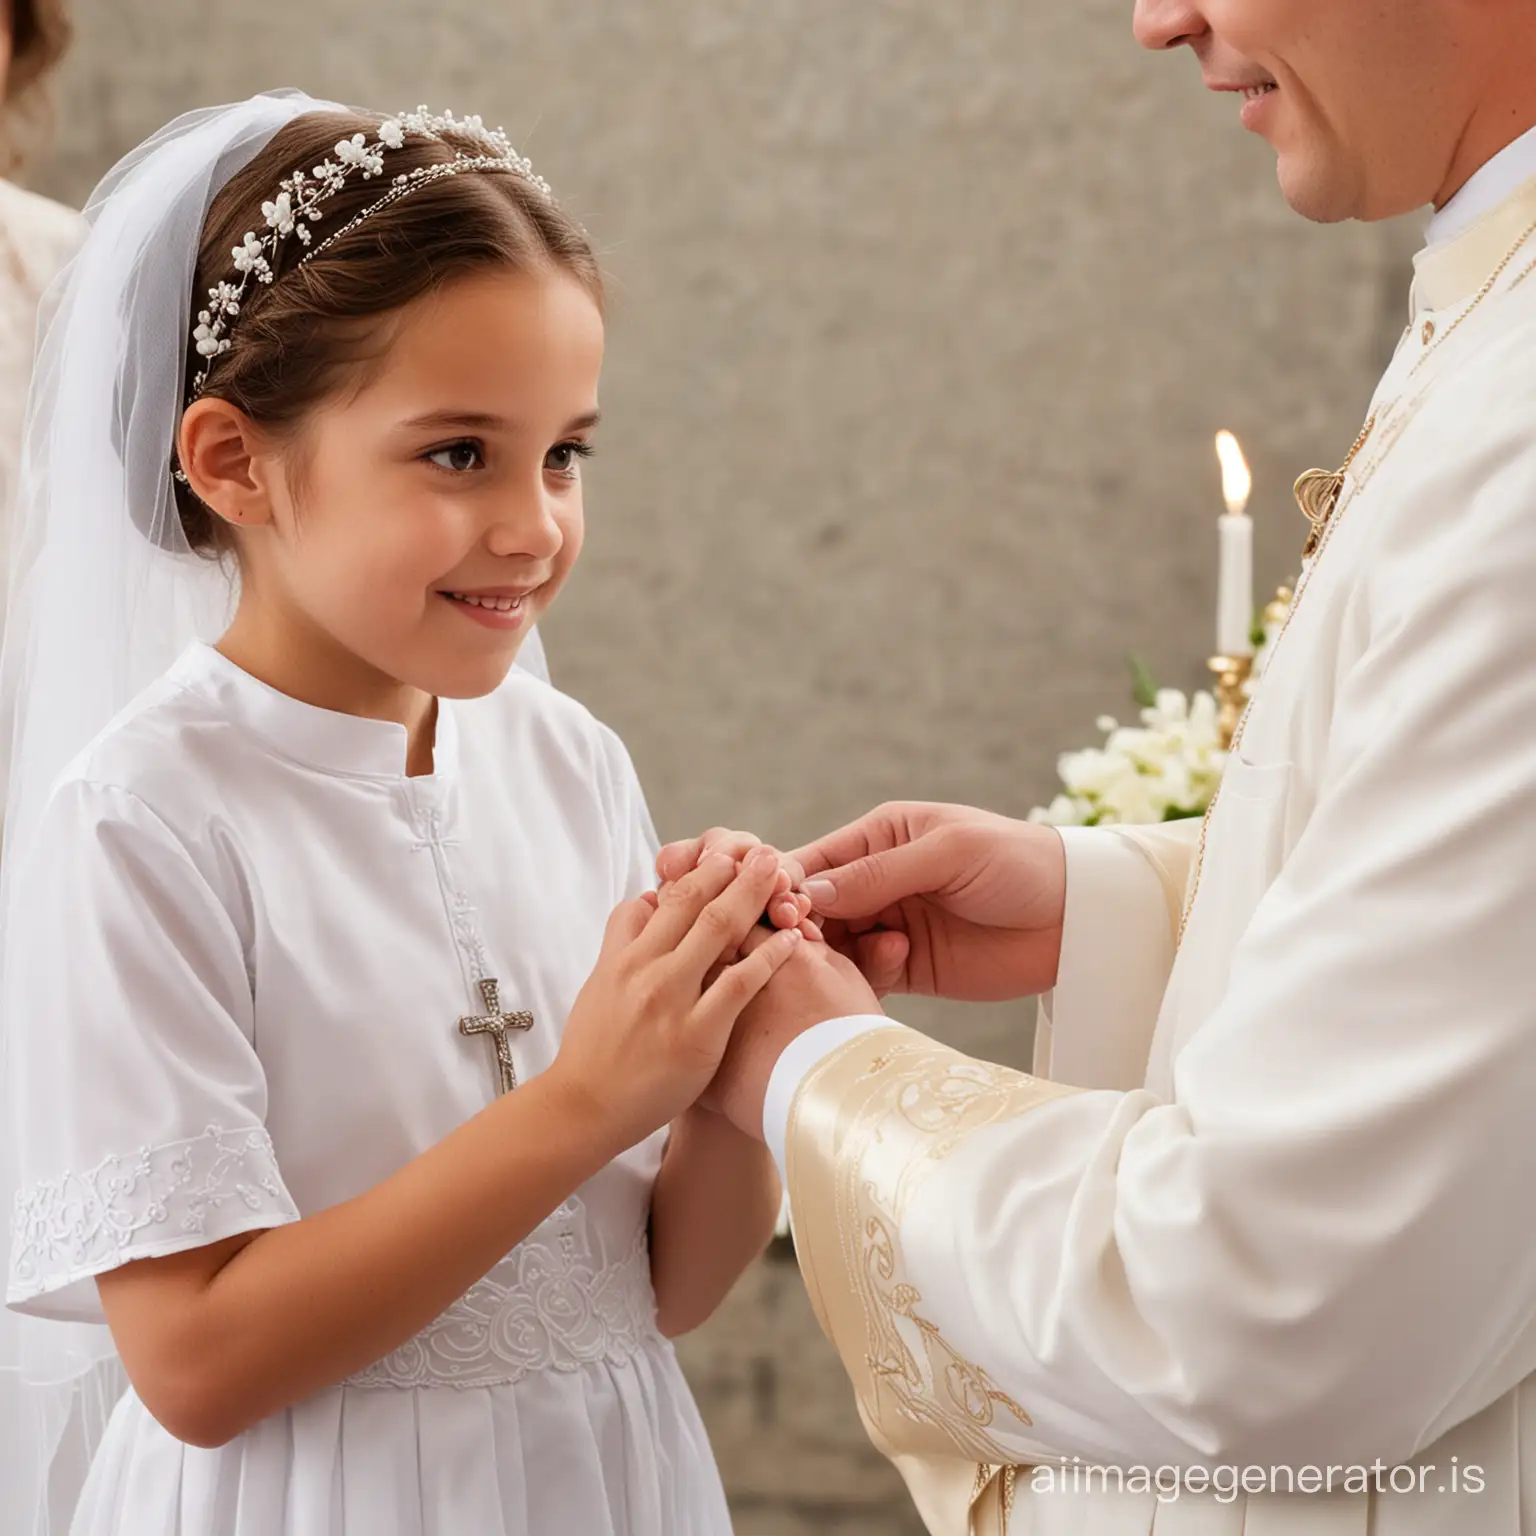 Childs-First-Holy-Communion-Ceremony-with-Family-and-Church-Setting